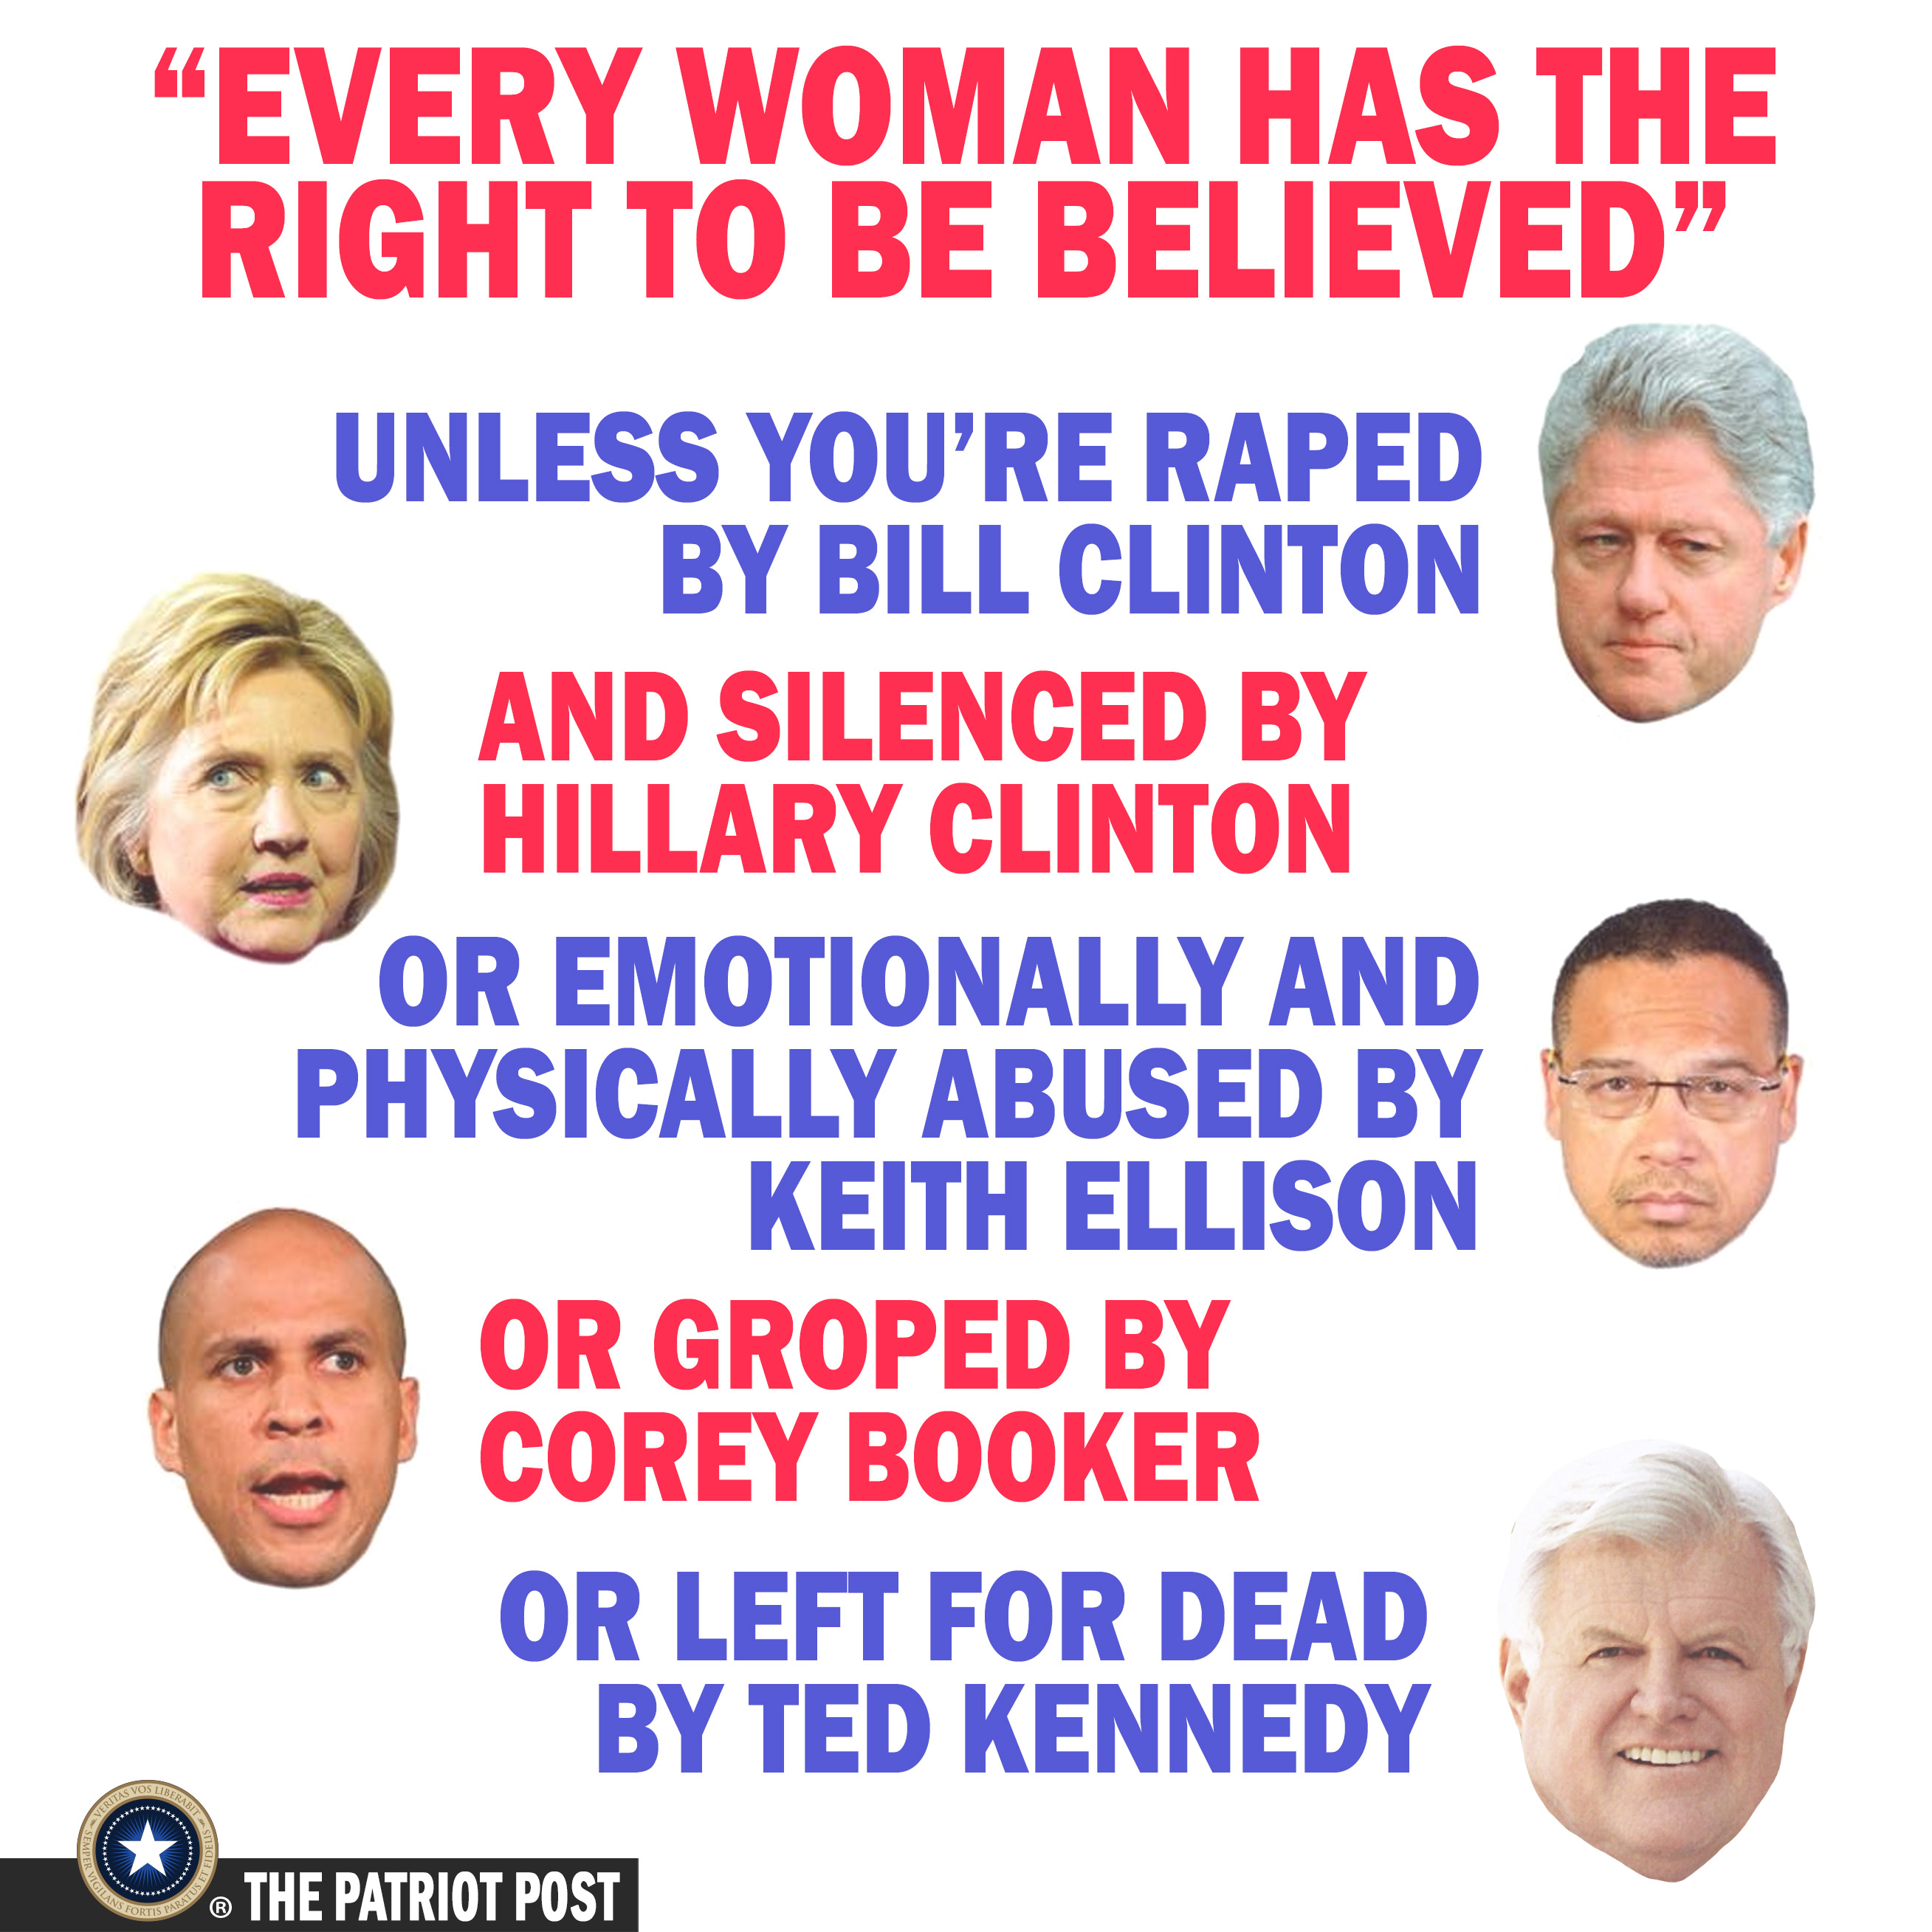 polaris ranger - "Every Woman Has The Right To Be Believed Unless You'Re Raped By Bill Clinton And Silenced By Hillary Clinton Or Emotionally And Physically Abused By Keith Ellison Or Groped By Corey Booker Or Left For Dead By Ted Kennedy The Patriot Post